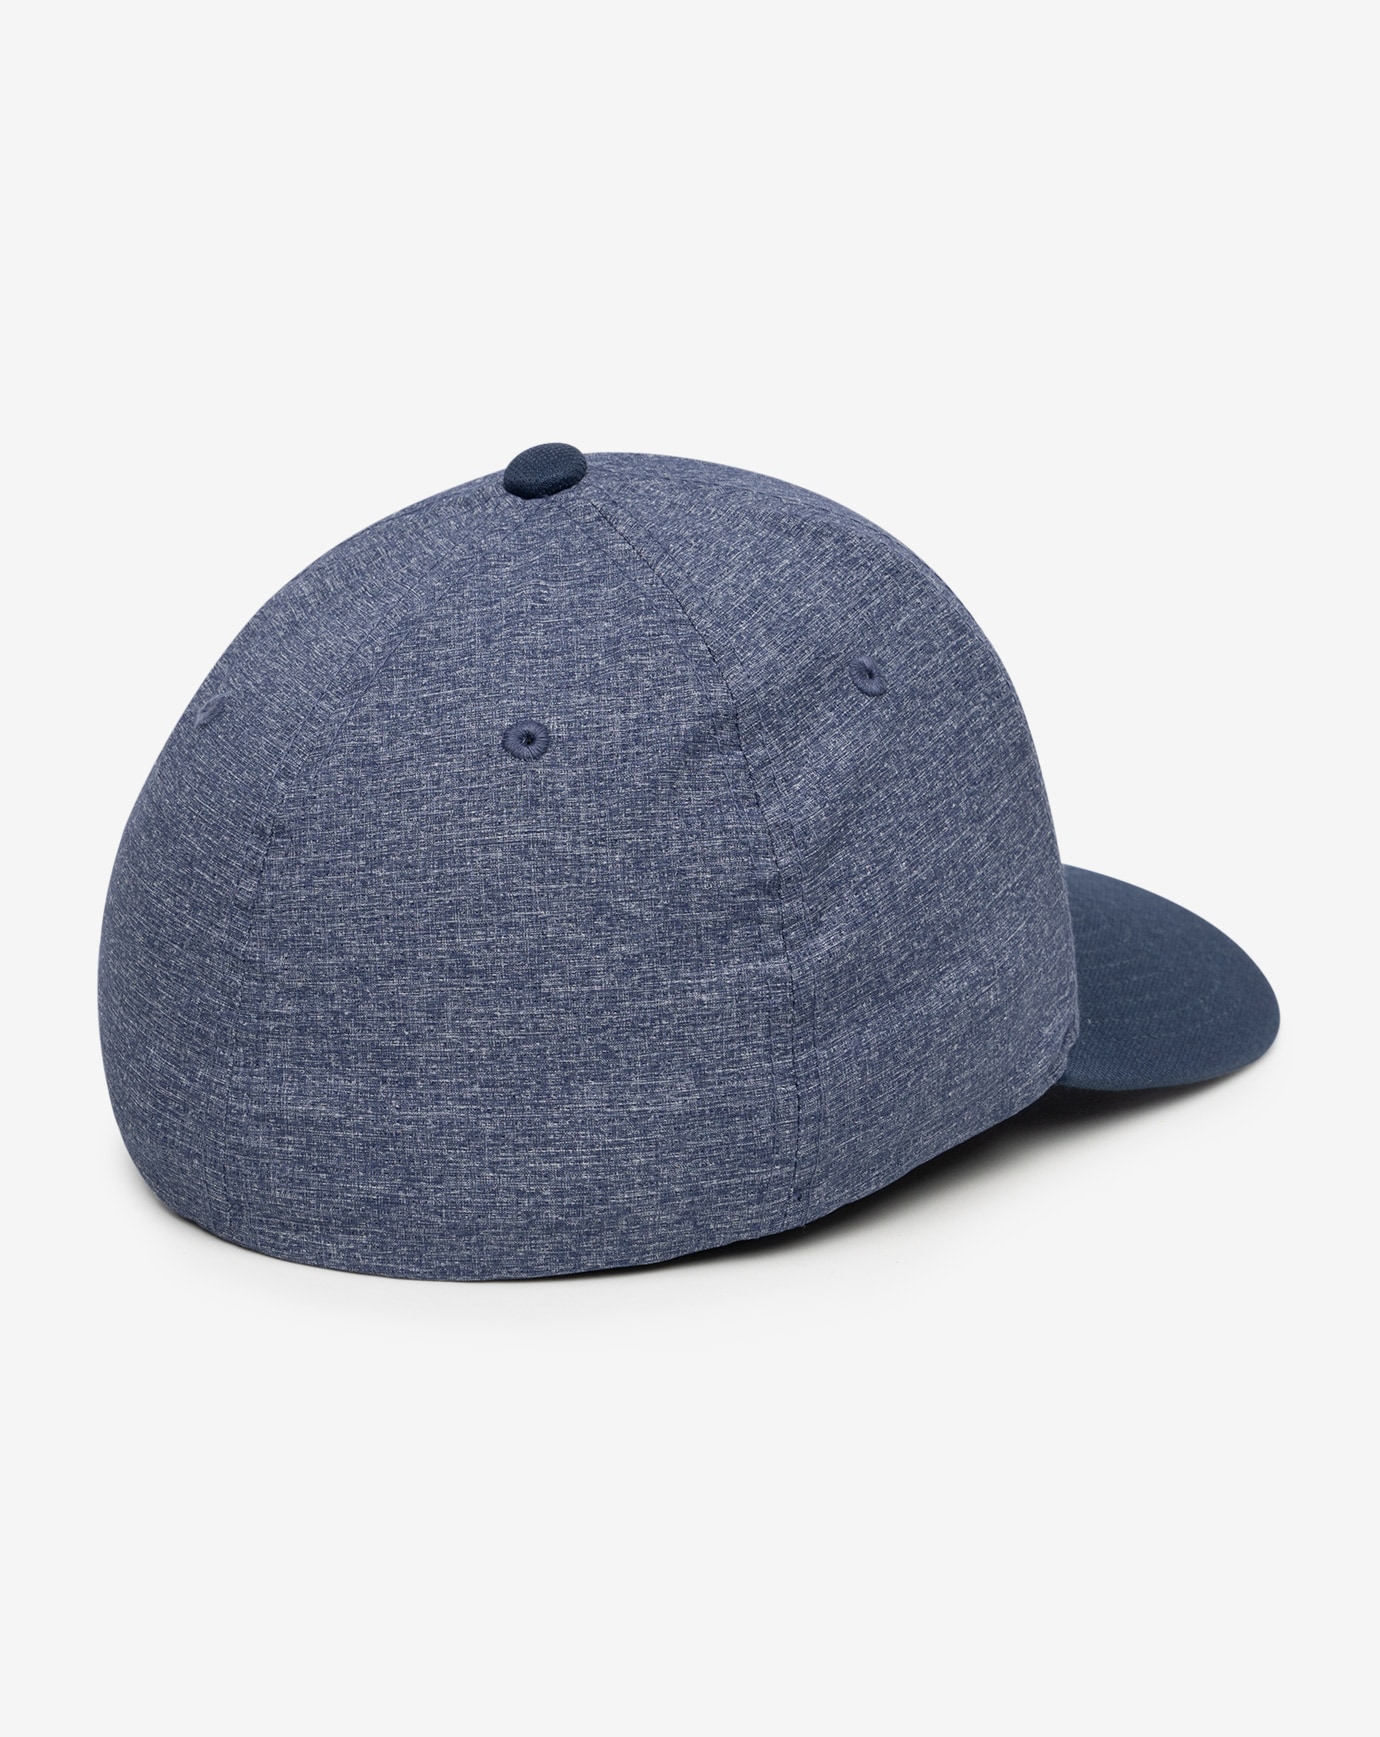 RAPIDO FITTED HAT Image Thumbnail 2